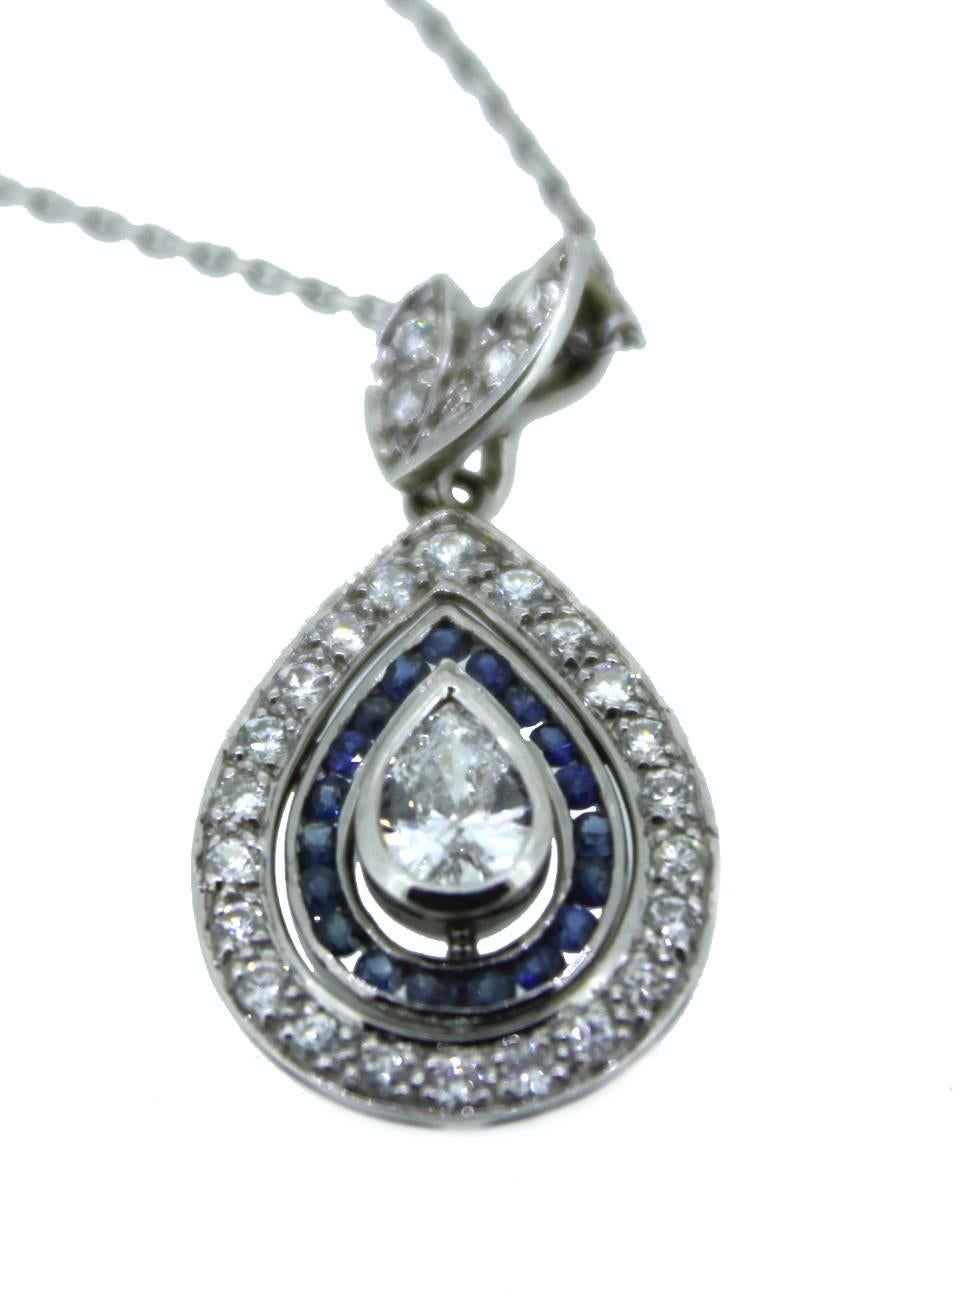 This beautiful time piece made of 14K white gold is decorated with diamond and blue sapphires.

In the center is 0.75 carat pear shape diamond, decorated around are 22 royal blue sapphires, at the edge of the pendent are 26 briljant cut diamonds